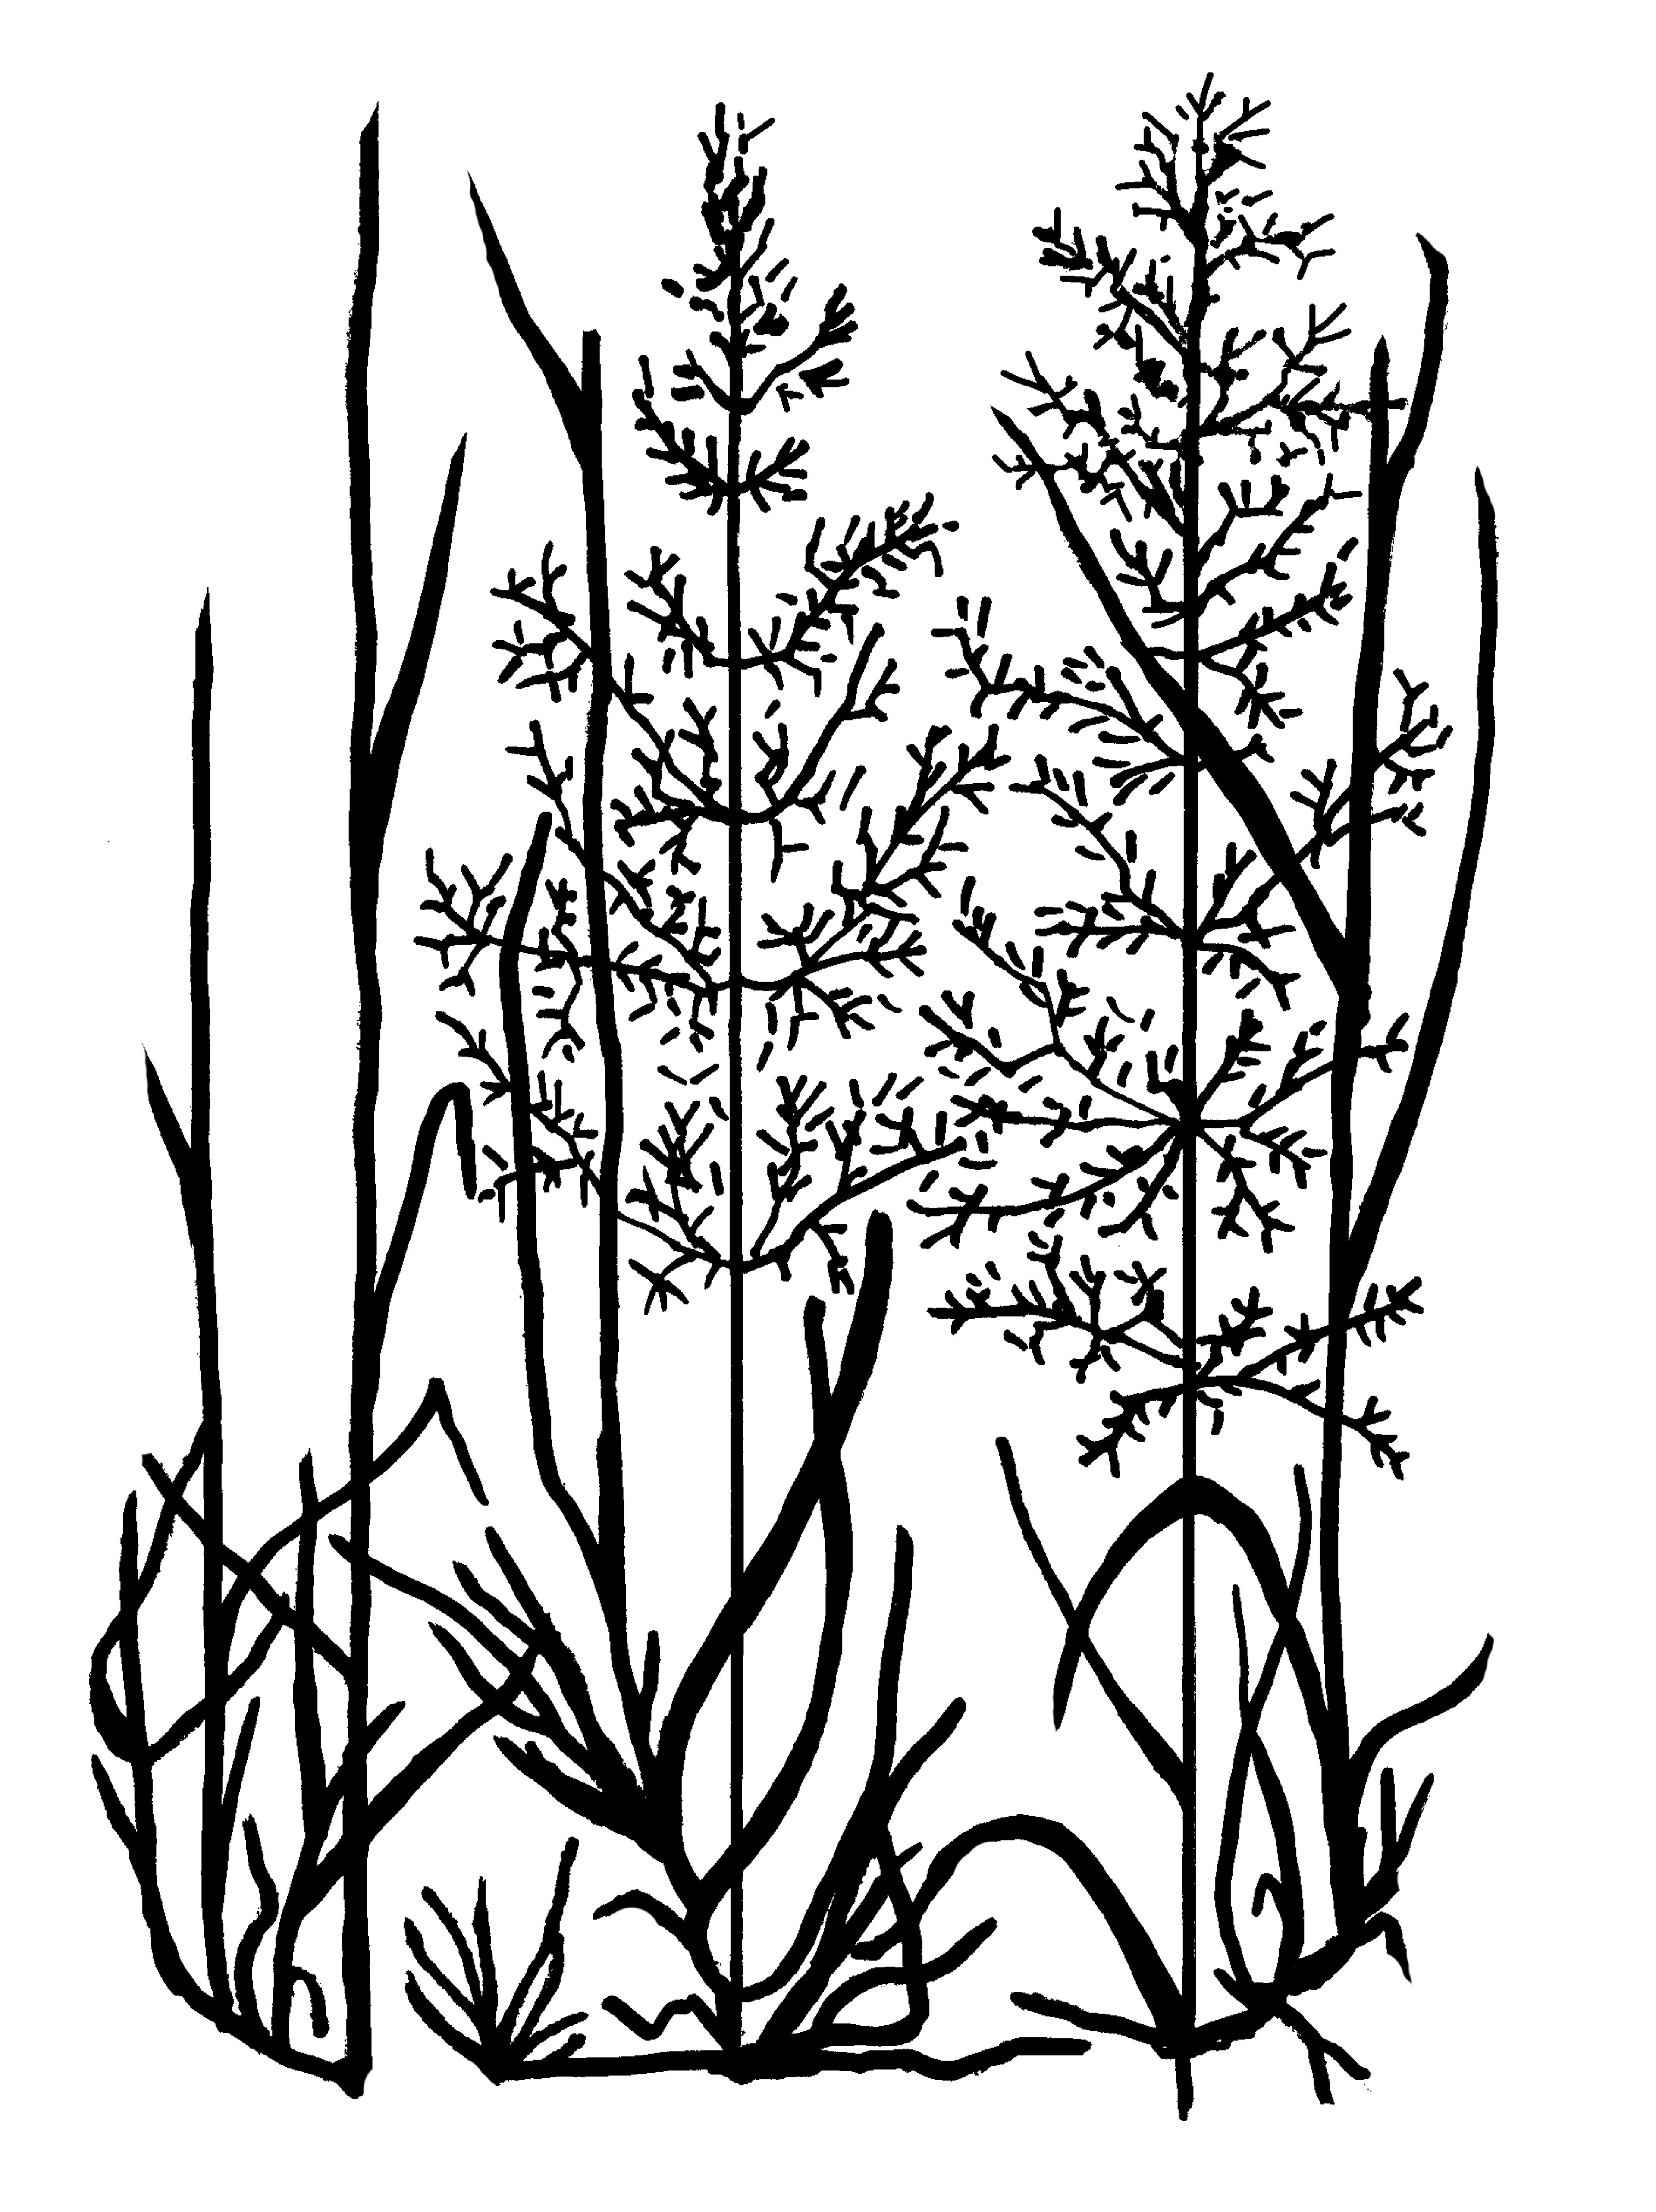 Abstracted black and white line drawing of grass.